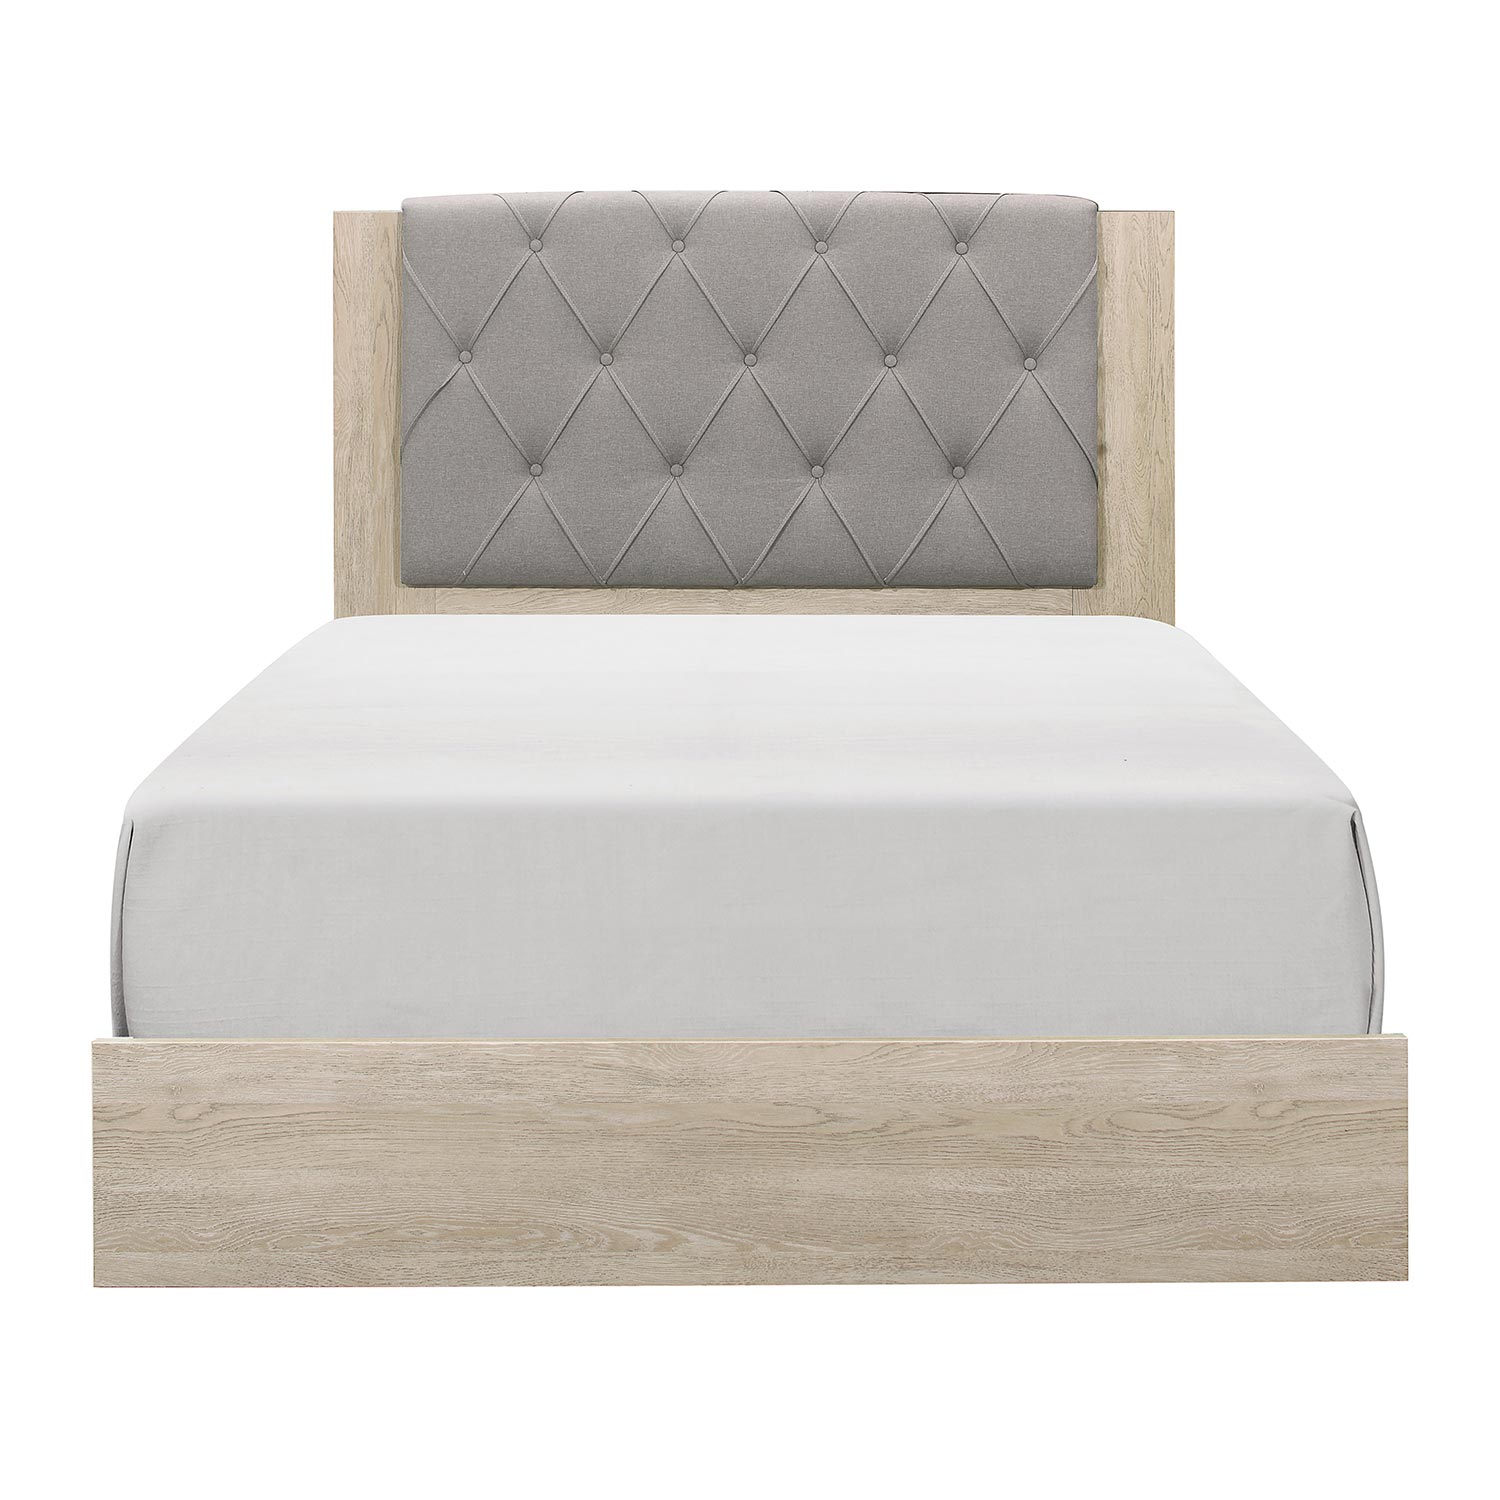 Homelegance Whiting Low Profile Bed - Cream and Black